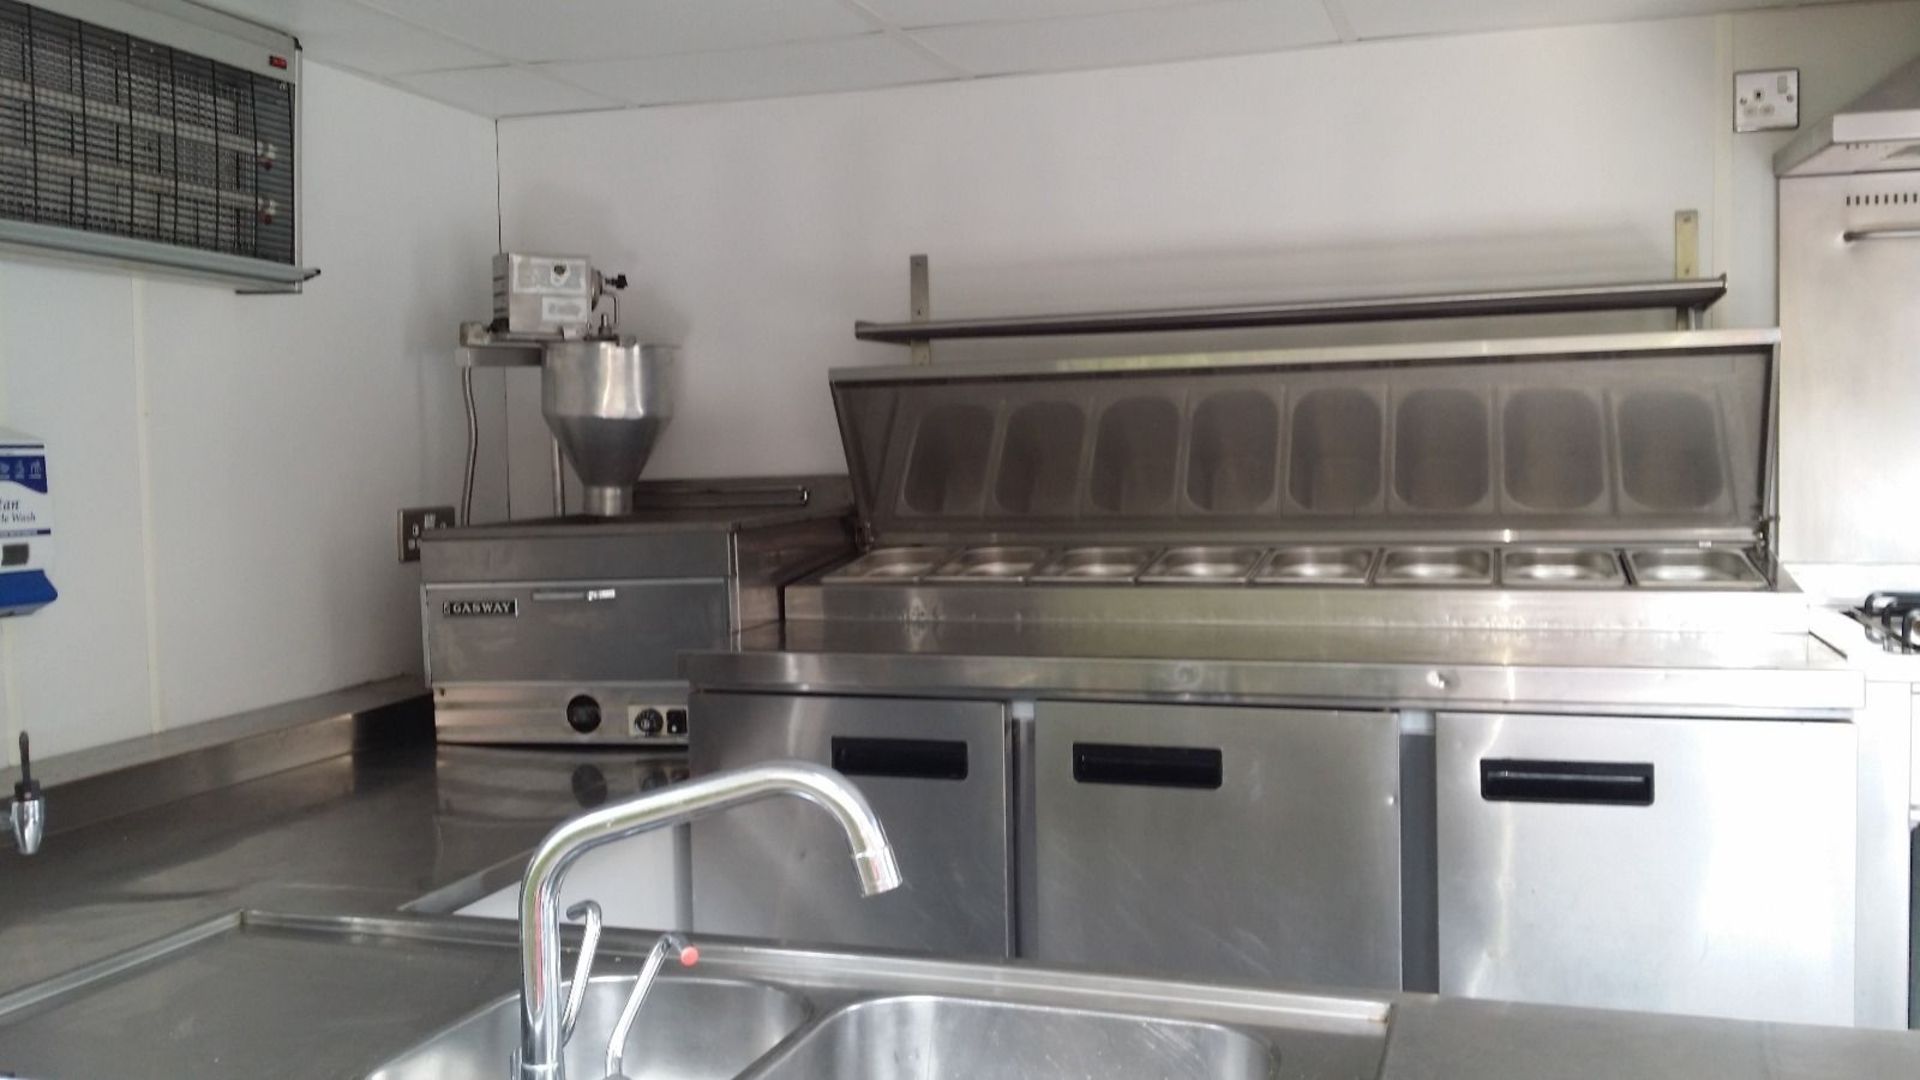 5 Star Rated A Pro Catering Unit Indespension Trailer - Bild 4 aus 7